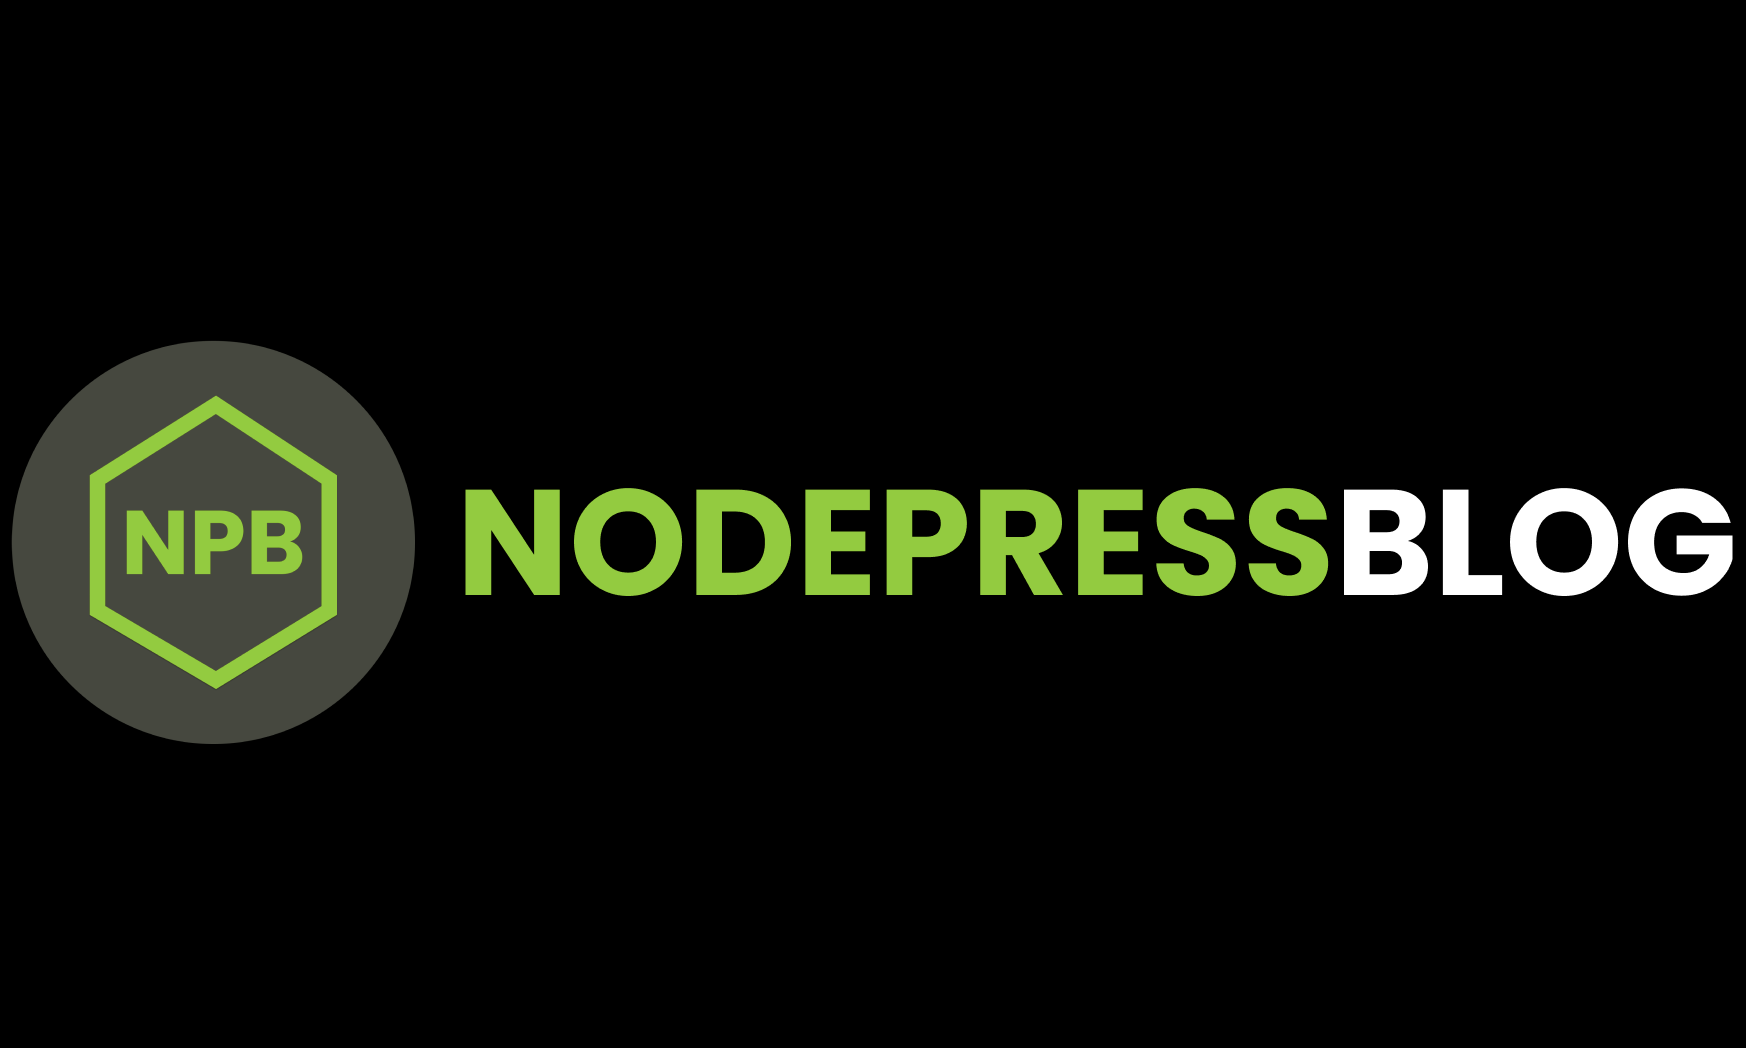 NodePress is the ultimate CMS solution for bloggers. Built with Node.js, React, and Next.js, it offers a user-friendly interface, customizable themes, comprehensive content management system, SEO-friendly tools, and a built-in user management system. With its modern technology stack and regular security updates, NodePress is a reliable and scalable platform that is perfect for bloggers of all levels. Experience the power of NodePress and take your blog to the next level.